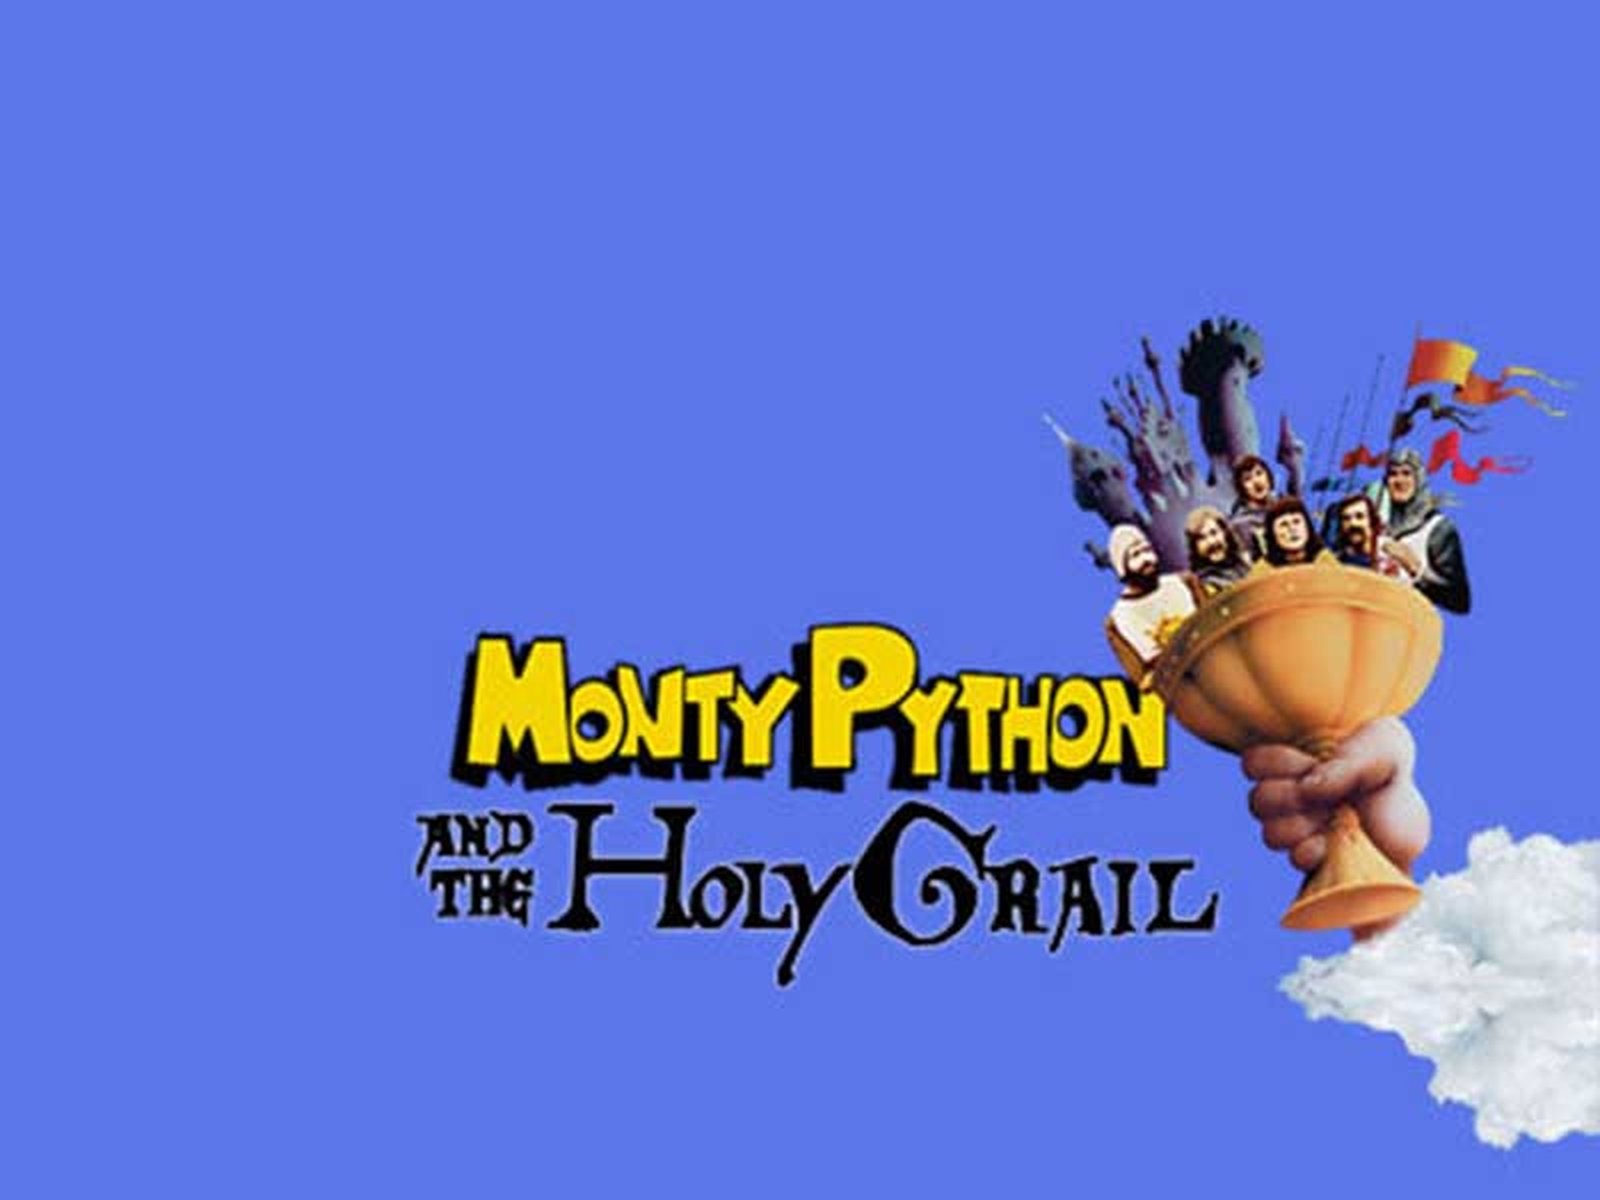 The Monty Python and the Holy Grail Online Slot Demo Game by Playtech